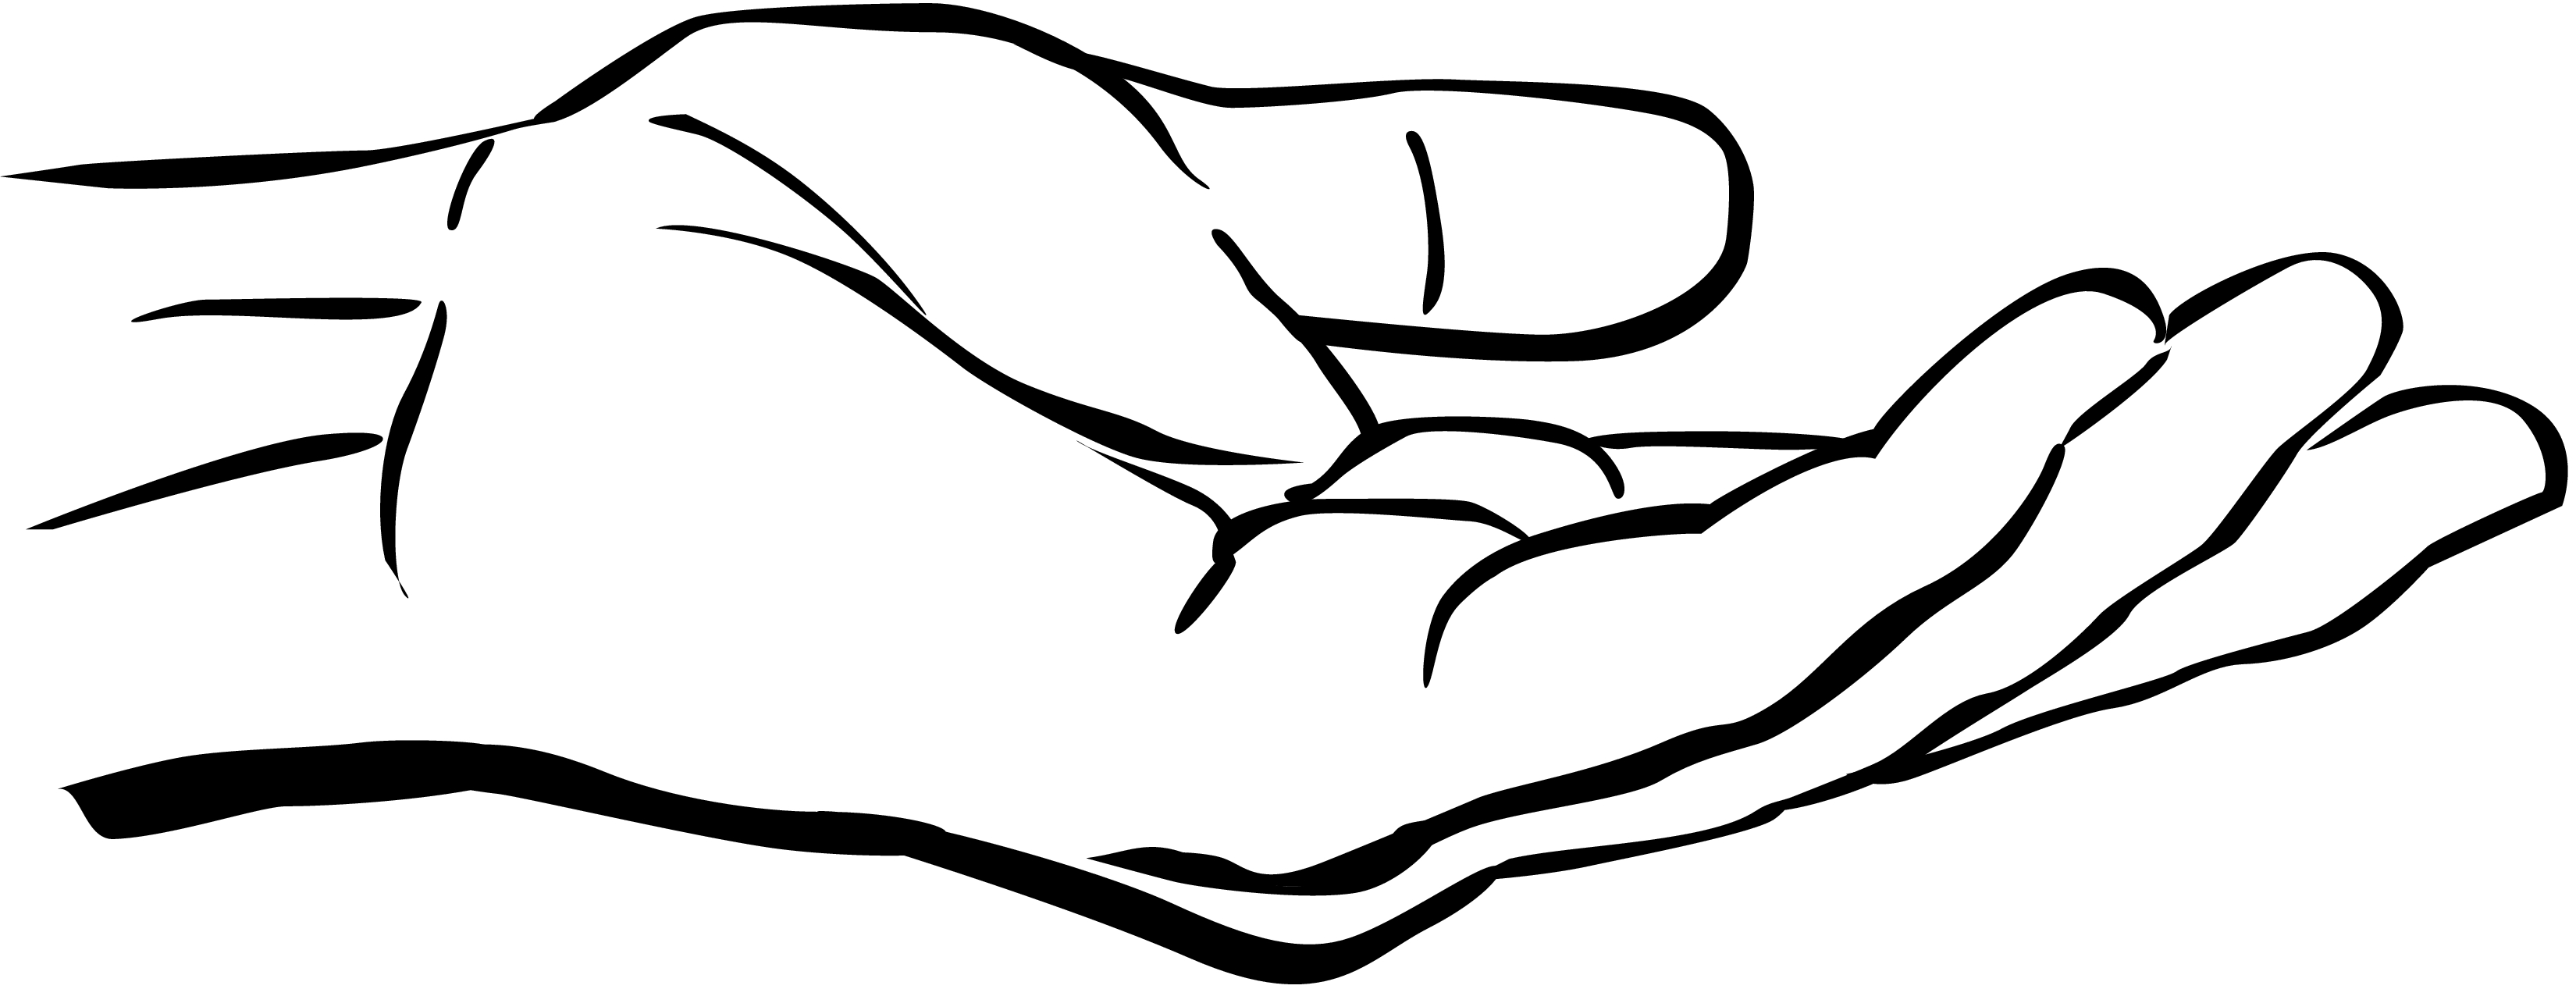 Giving Hands Images Png Image Clipart